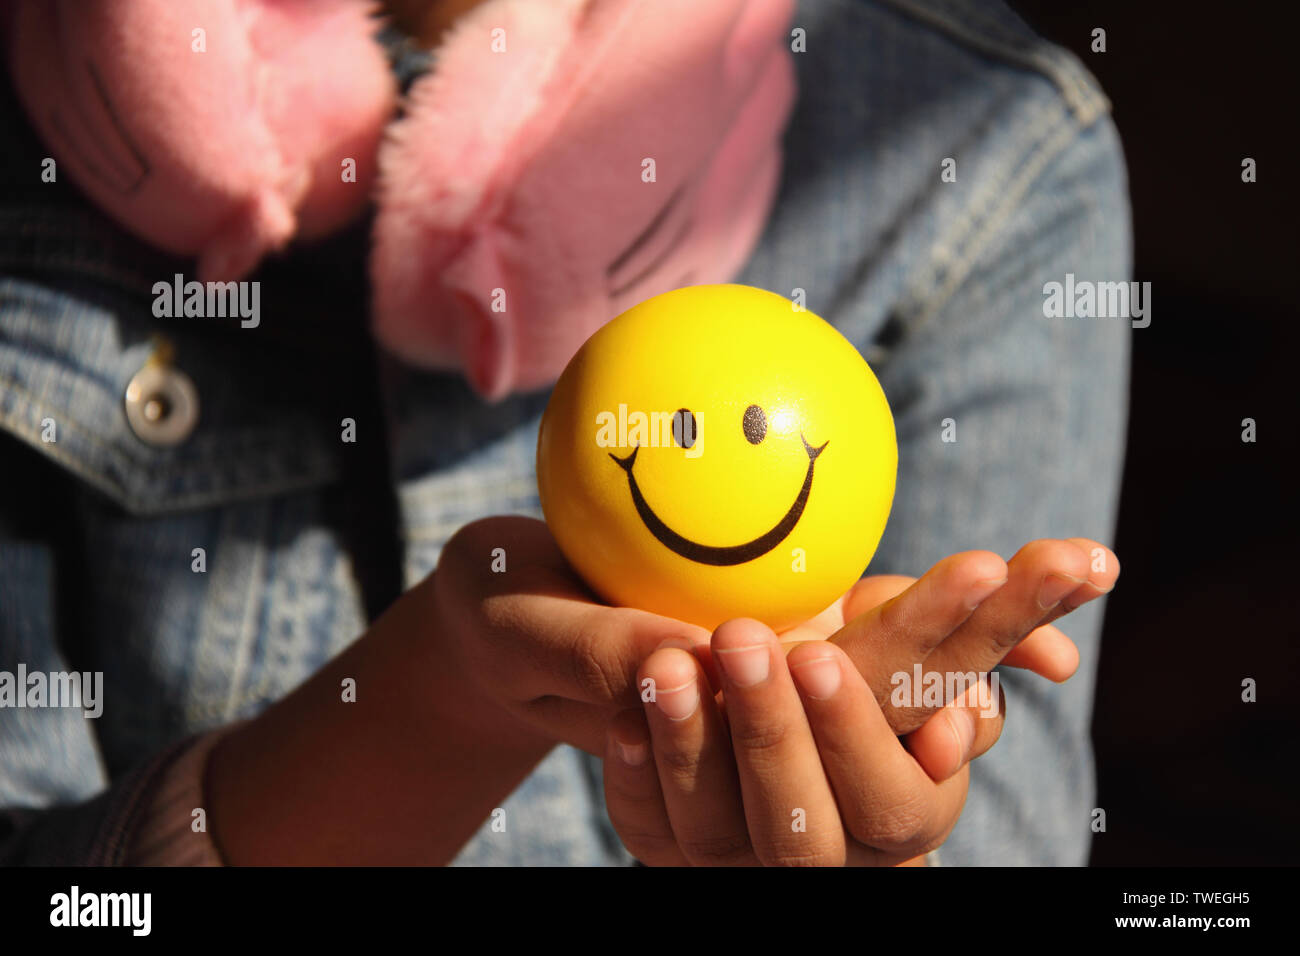 Girl holding a ball with smiley face Stock Photo